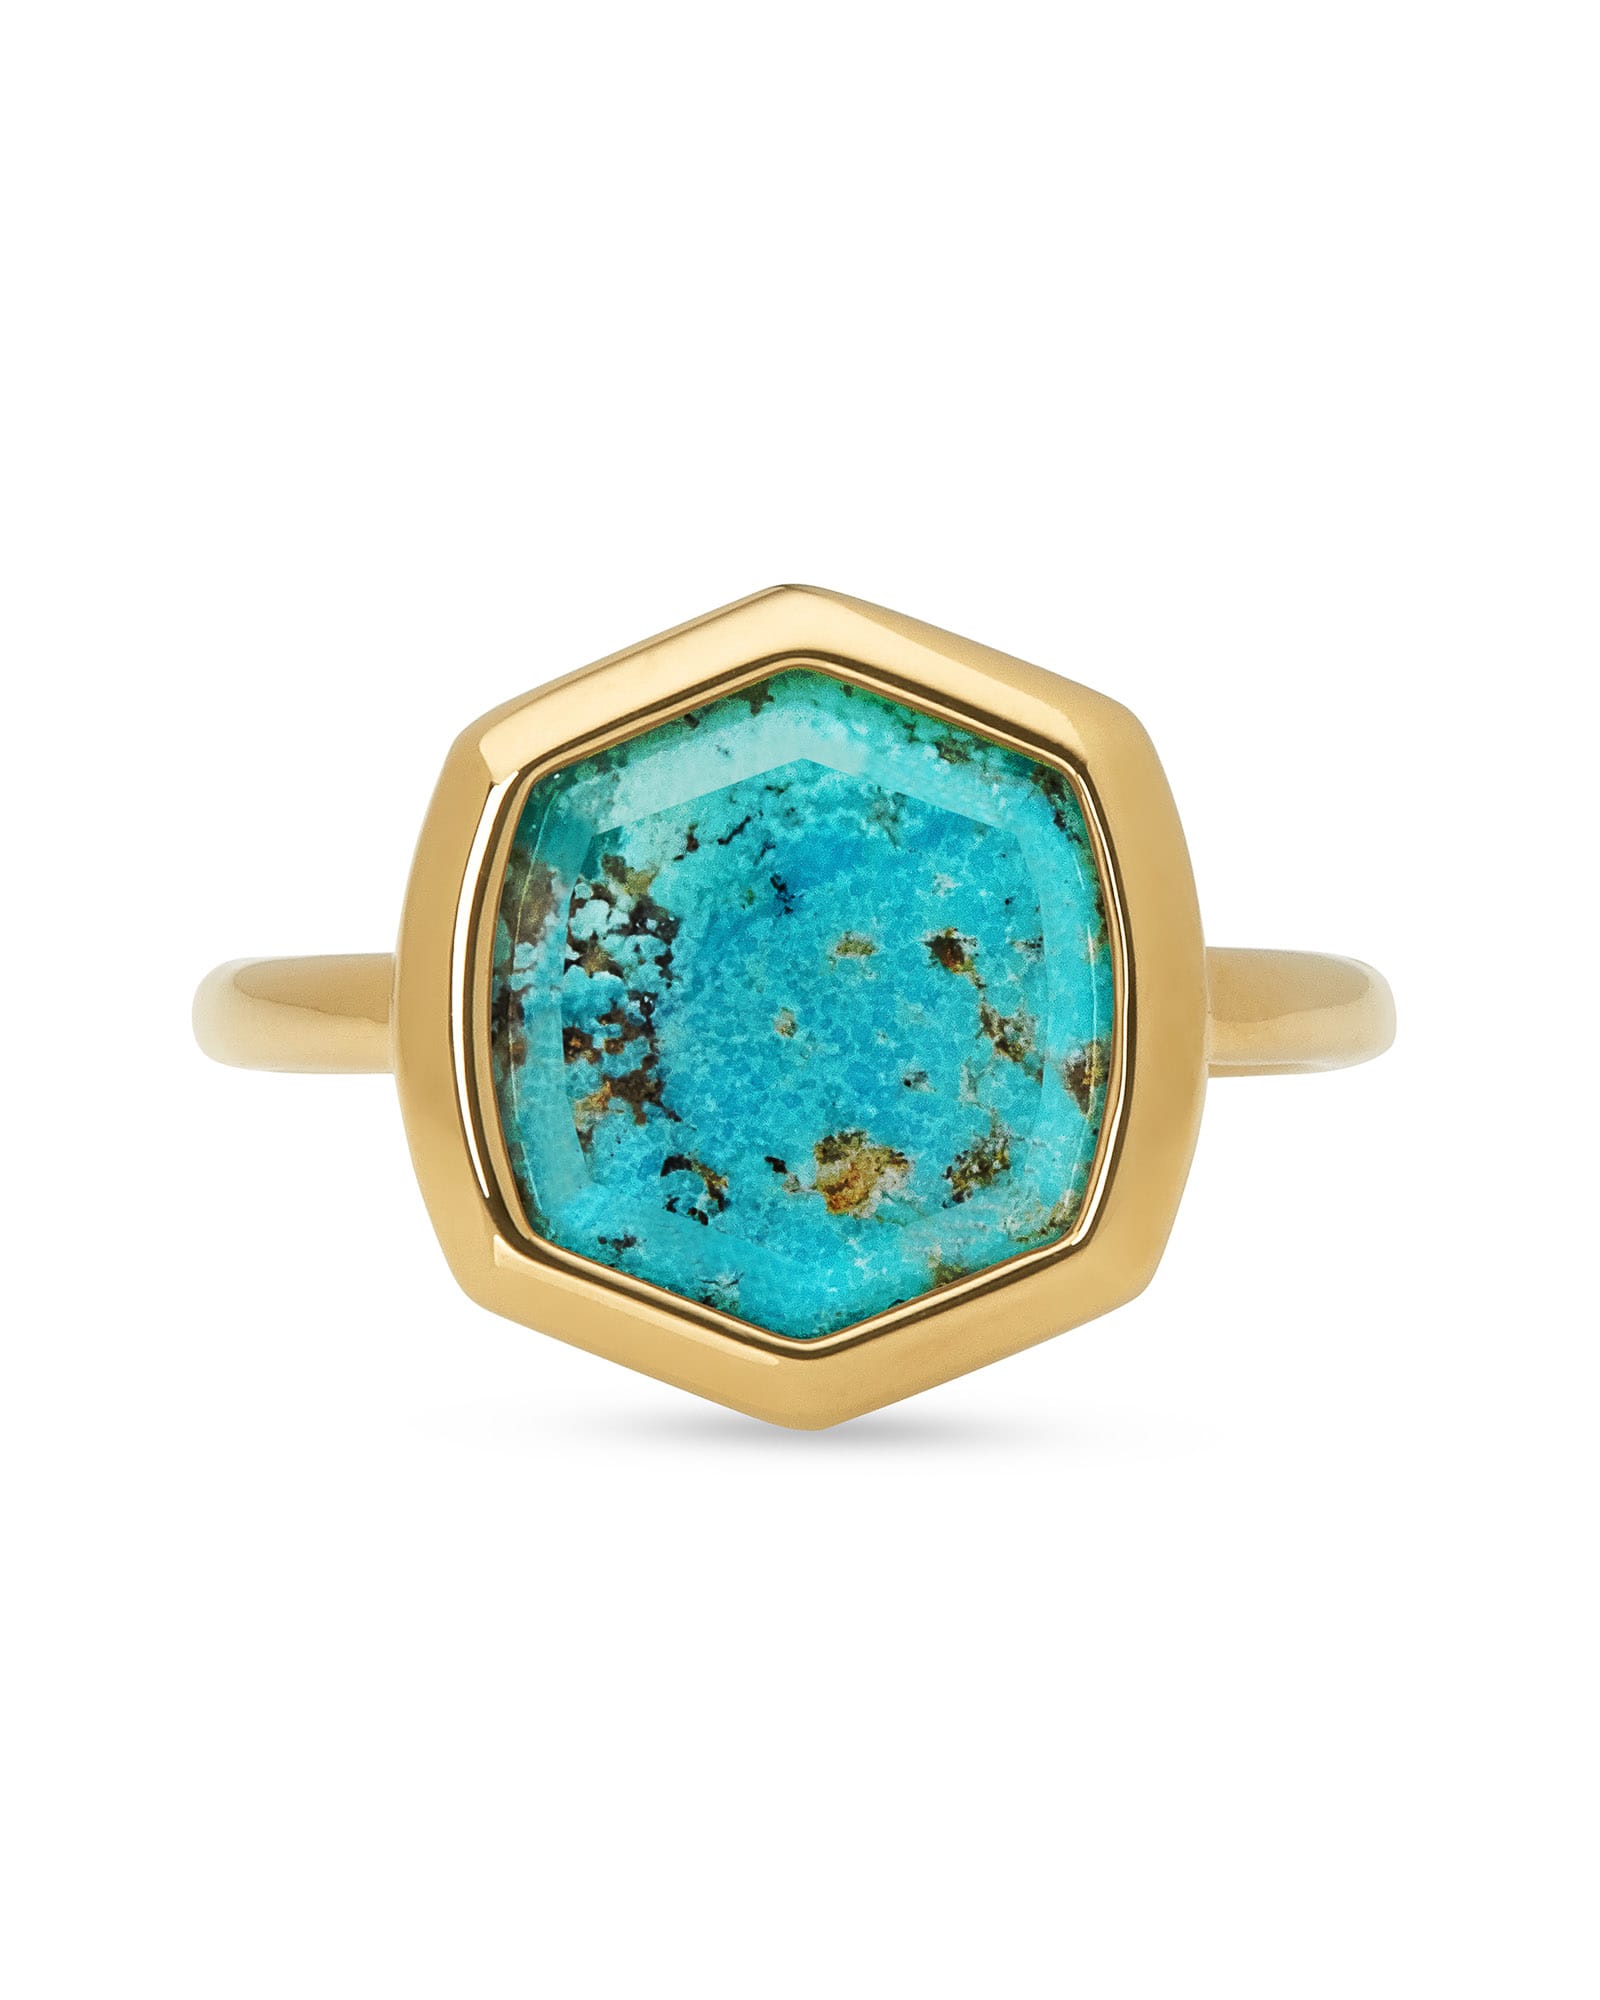 Kendra Scott Davis 18k Gold Vermeil Cocktail Ring in Turquoise | Genuine Turquoise